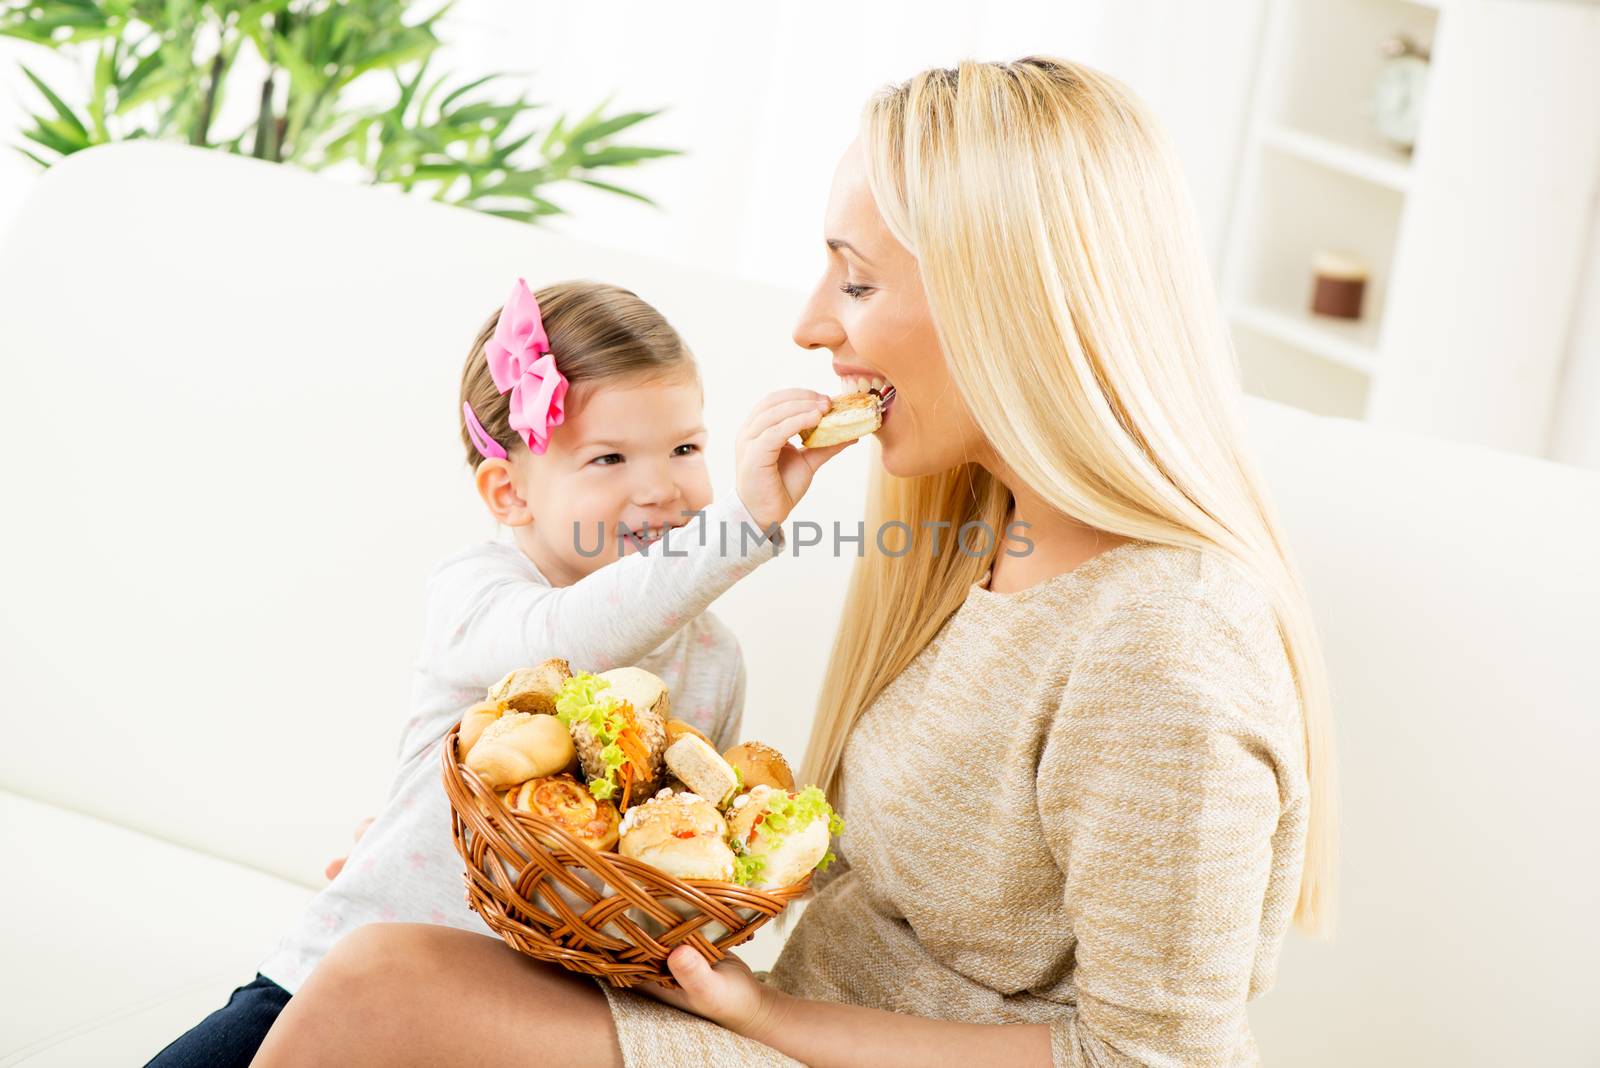 Cute little girl gives her beautiful mom snack of delicious pastry that she took from a basket held by her mother.